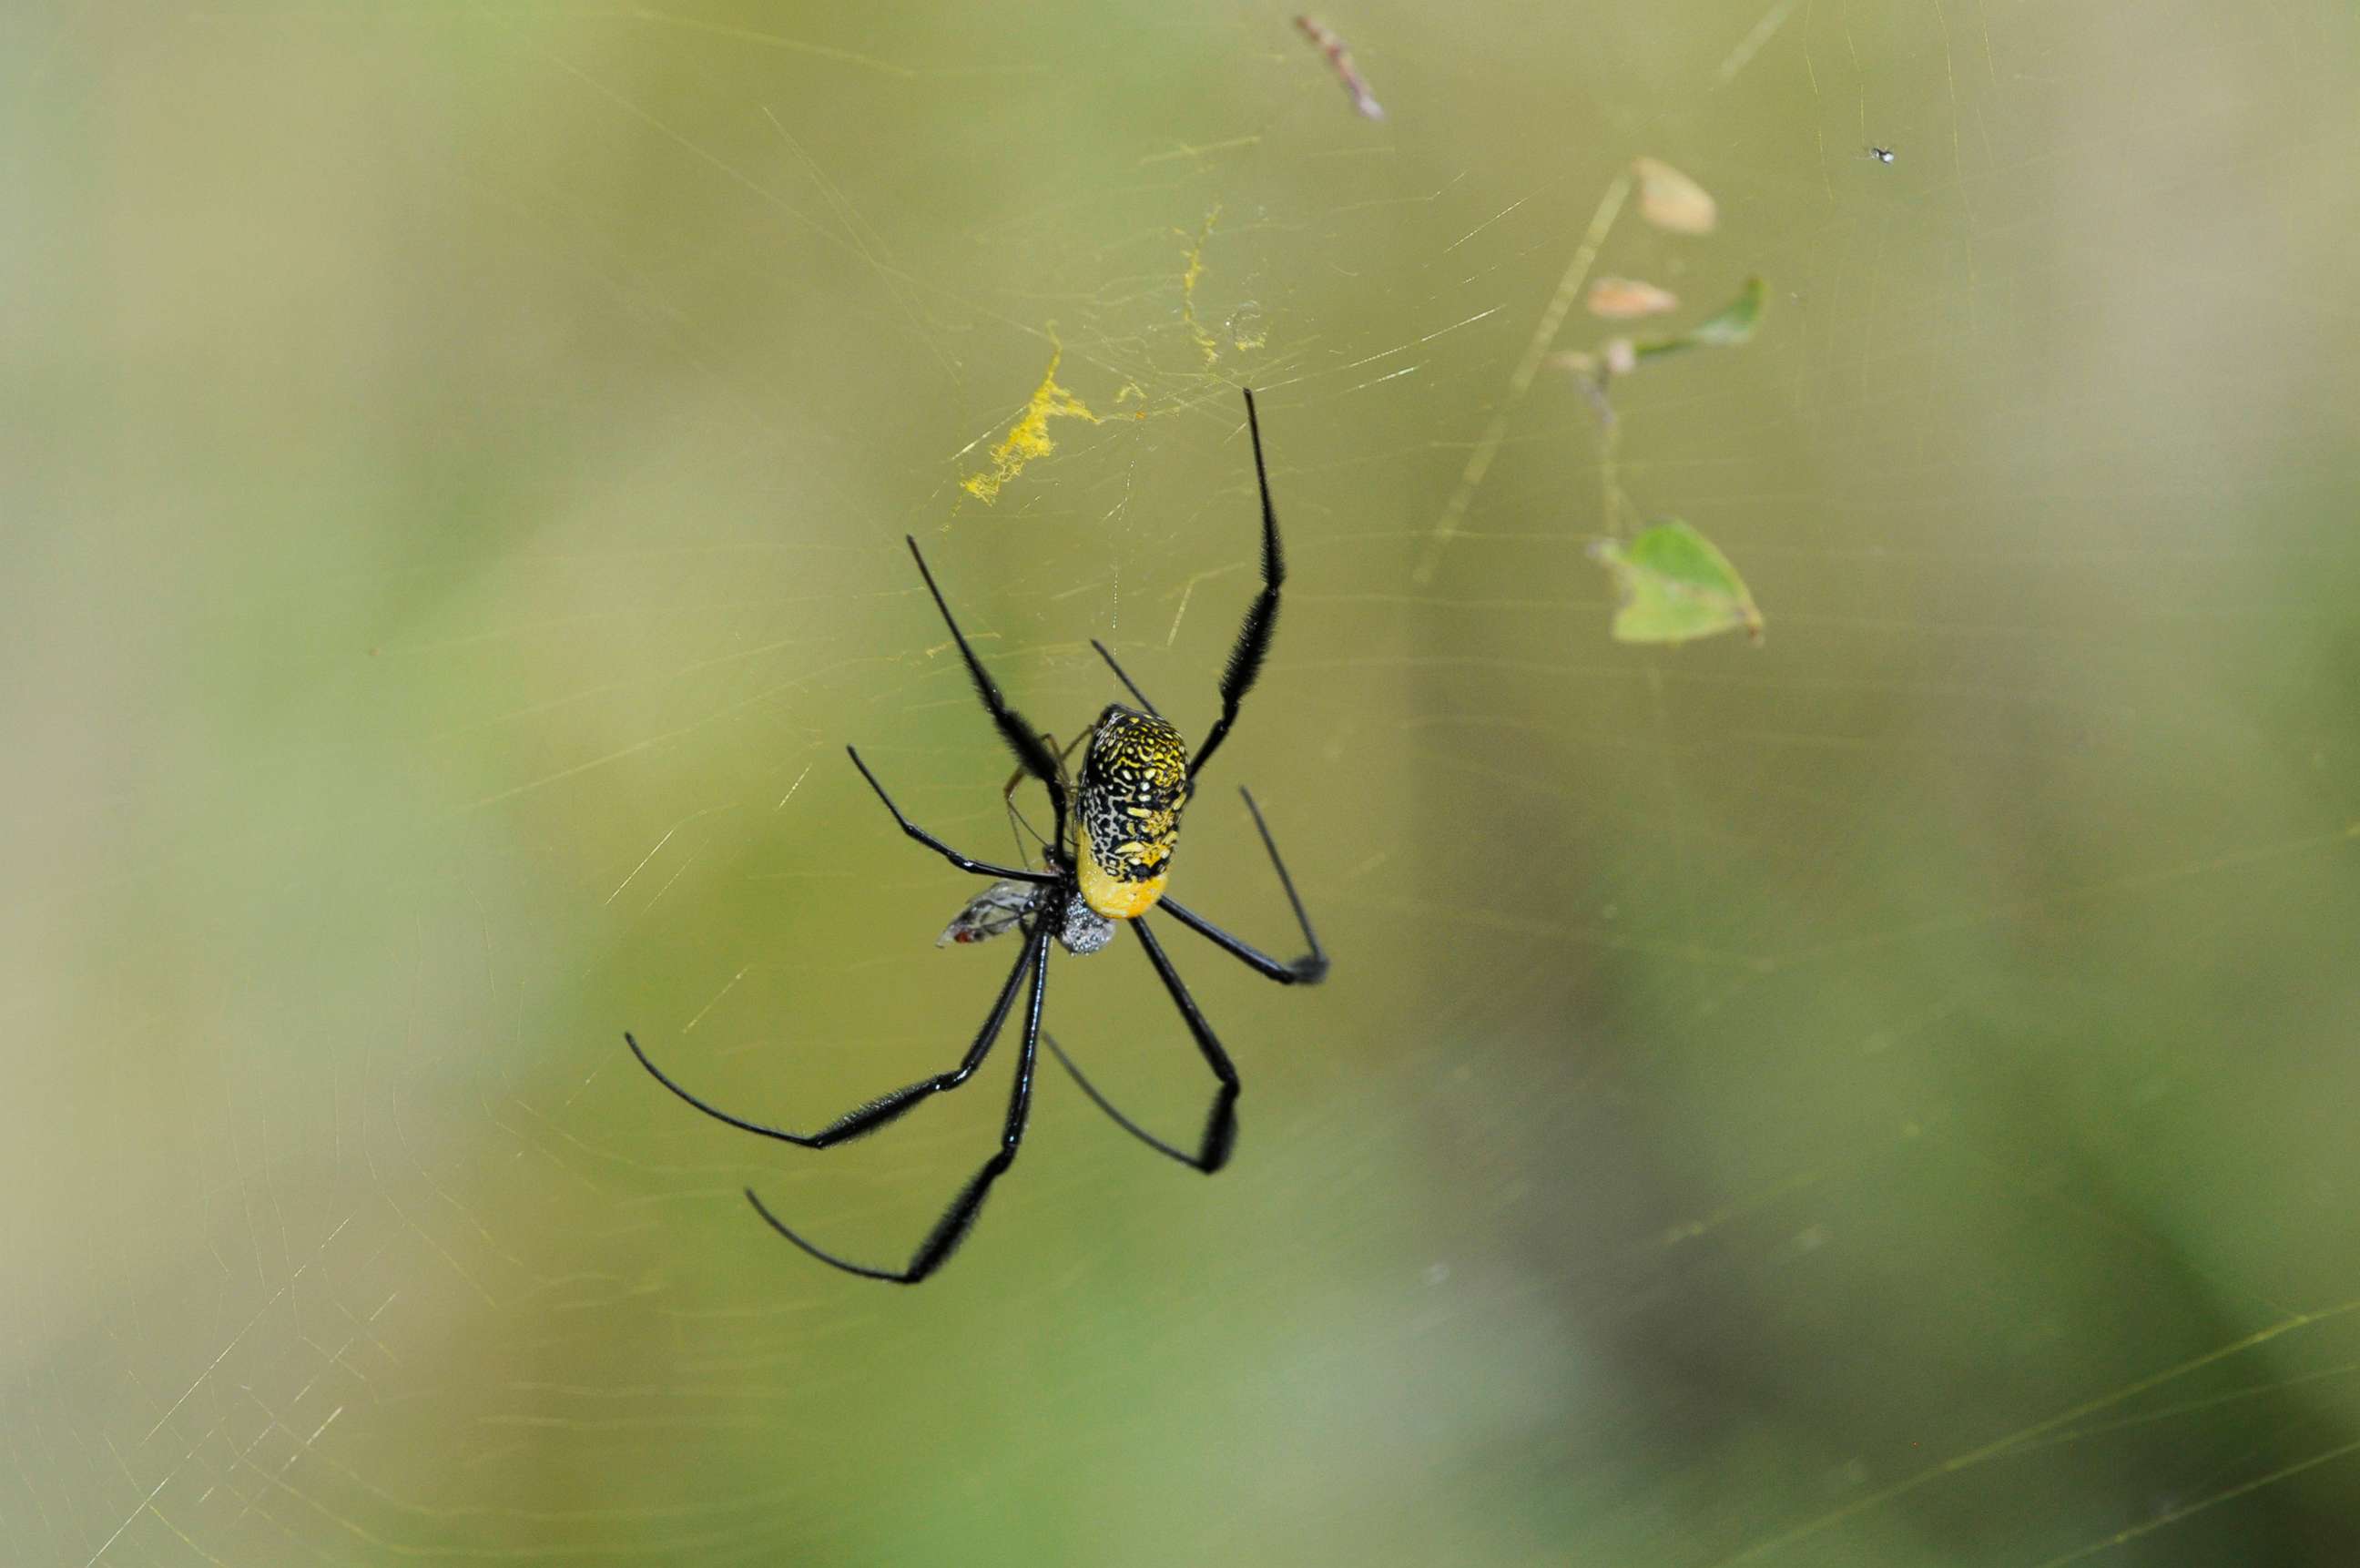 PHOTO: In this undated file photo, a golden orb-web spider (Nephila fenestrata) is shown.